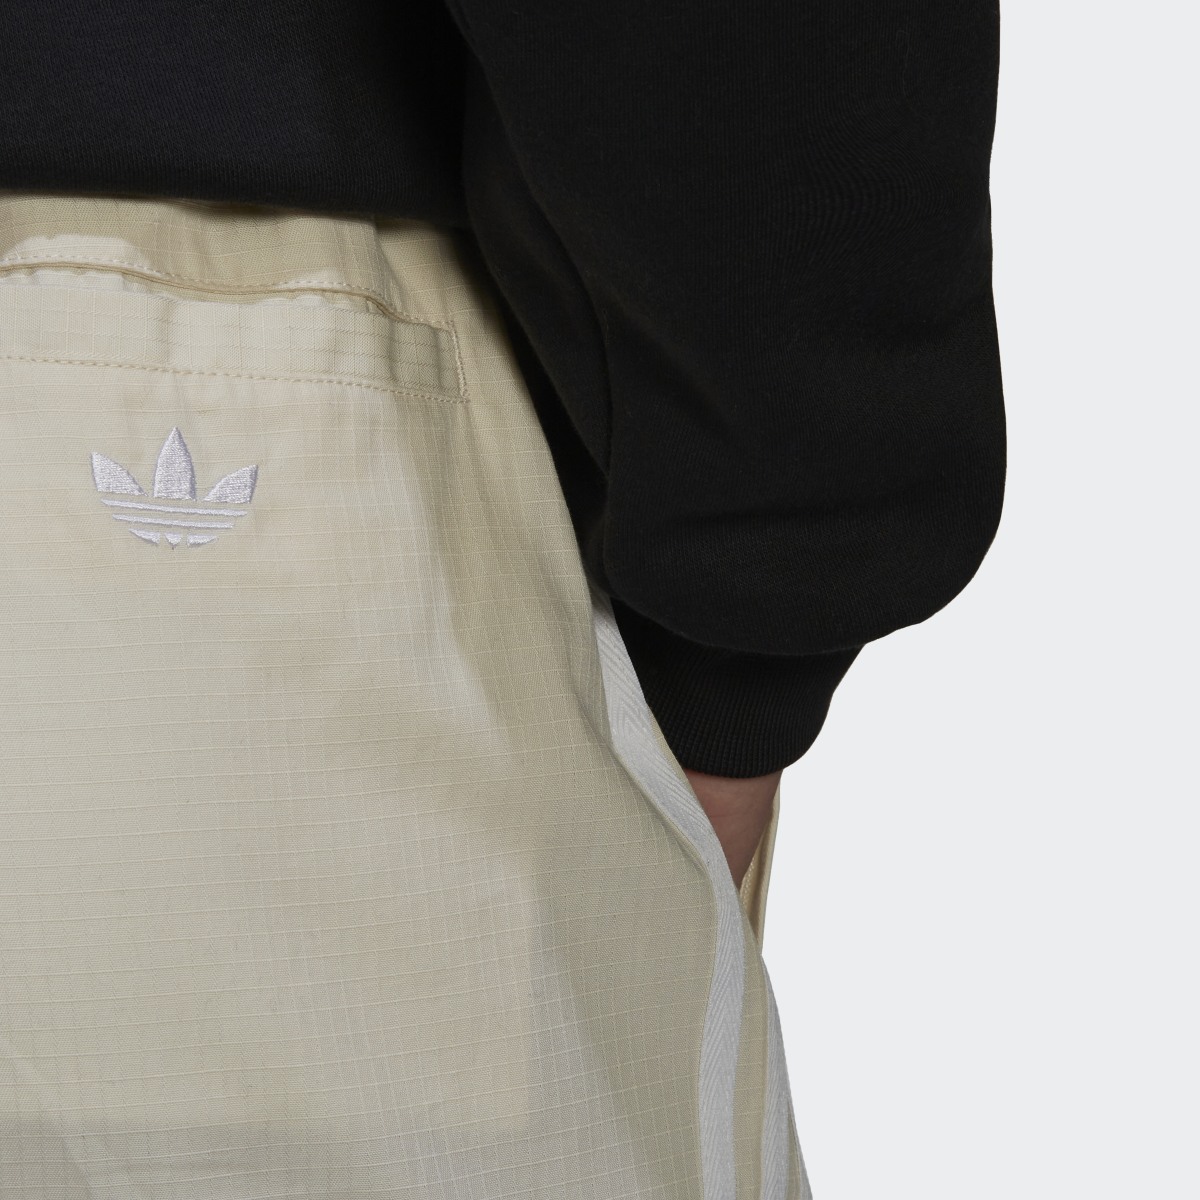 Adidas Work Trousers. 6